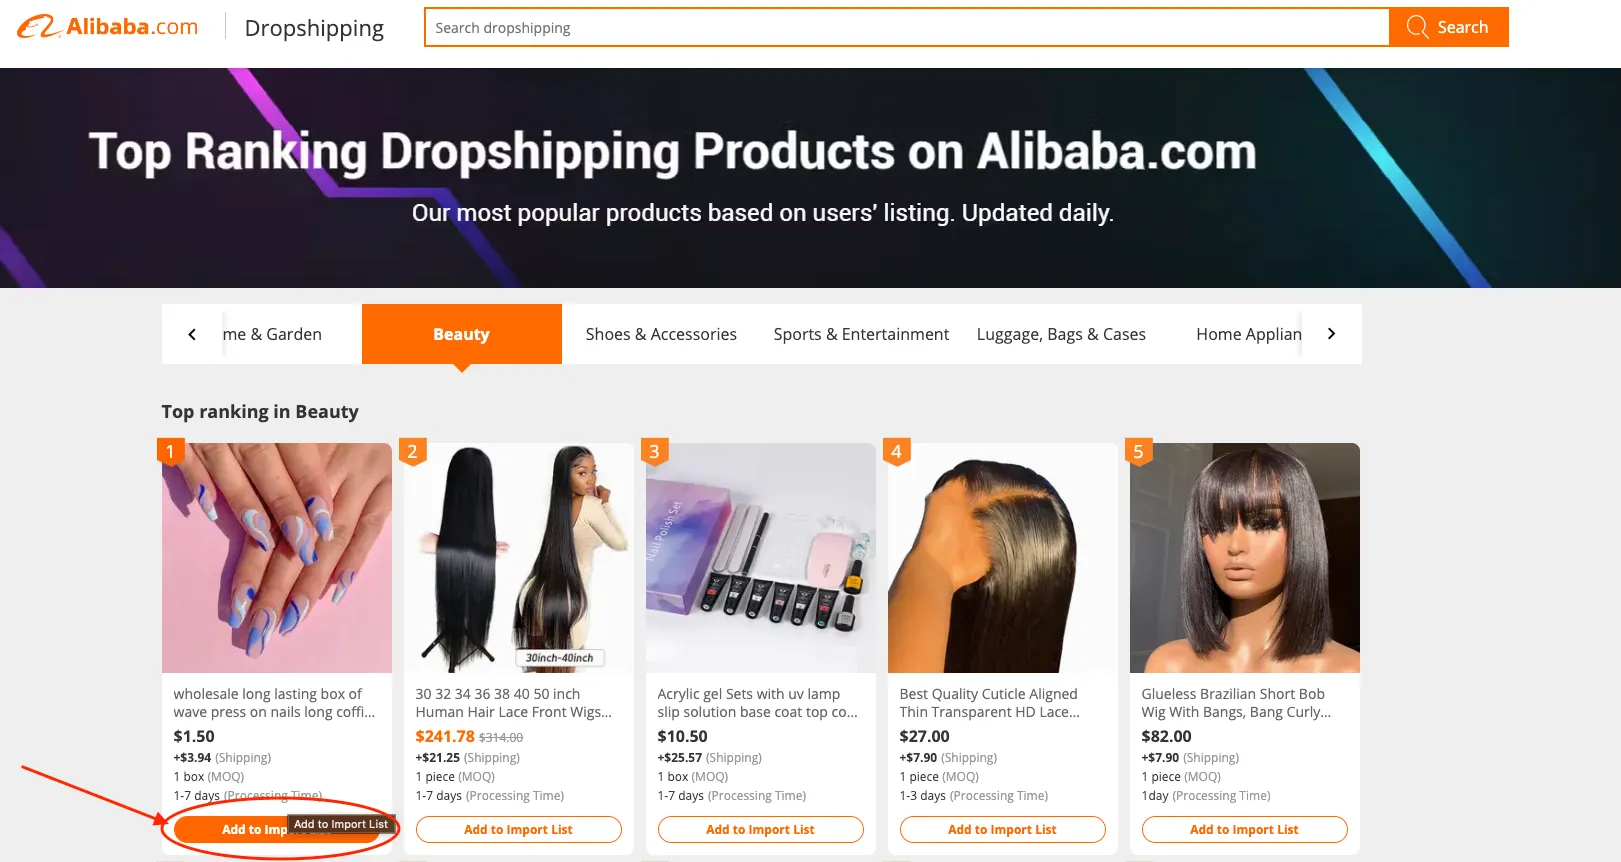 how to connect alibaba to shopify